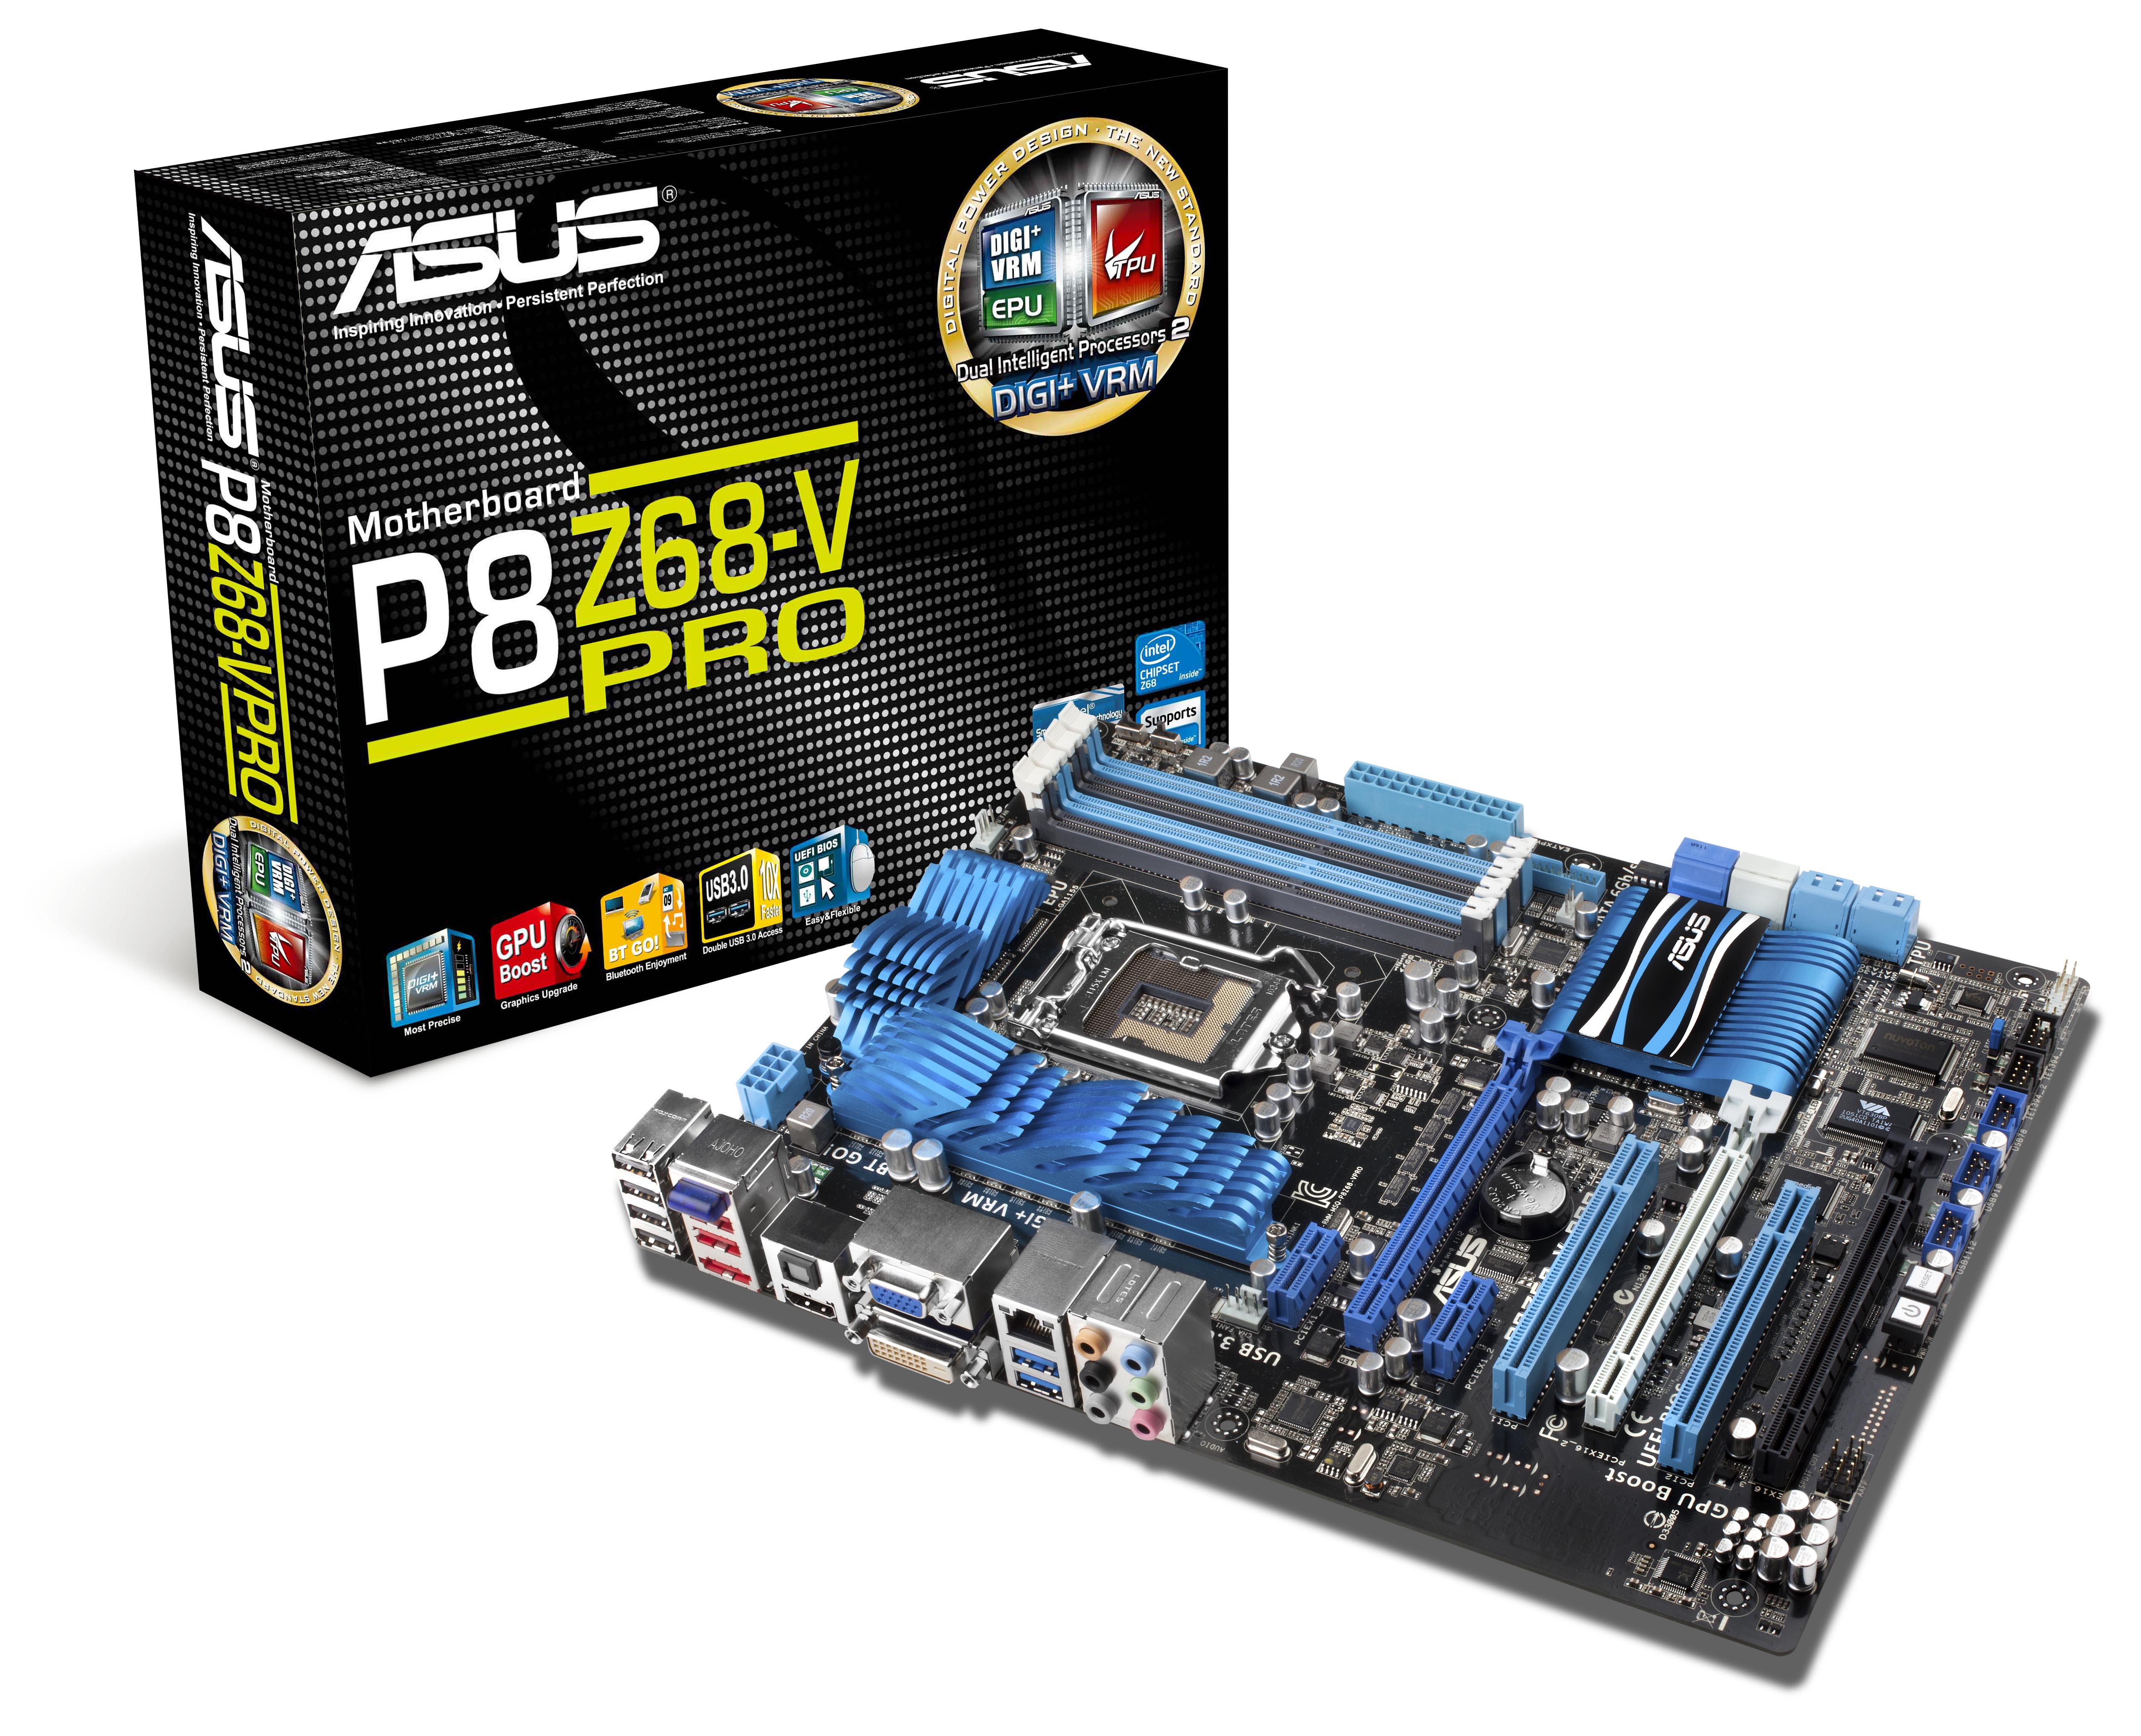 ASUS P8Z68-V PRO Review: Our First Z68 Motherboard